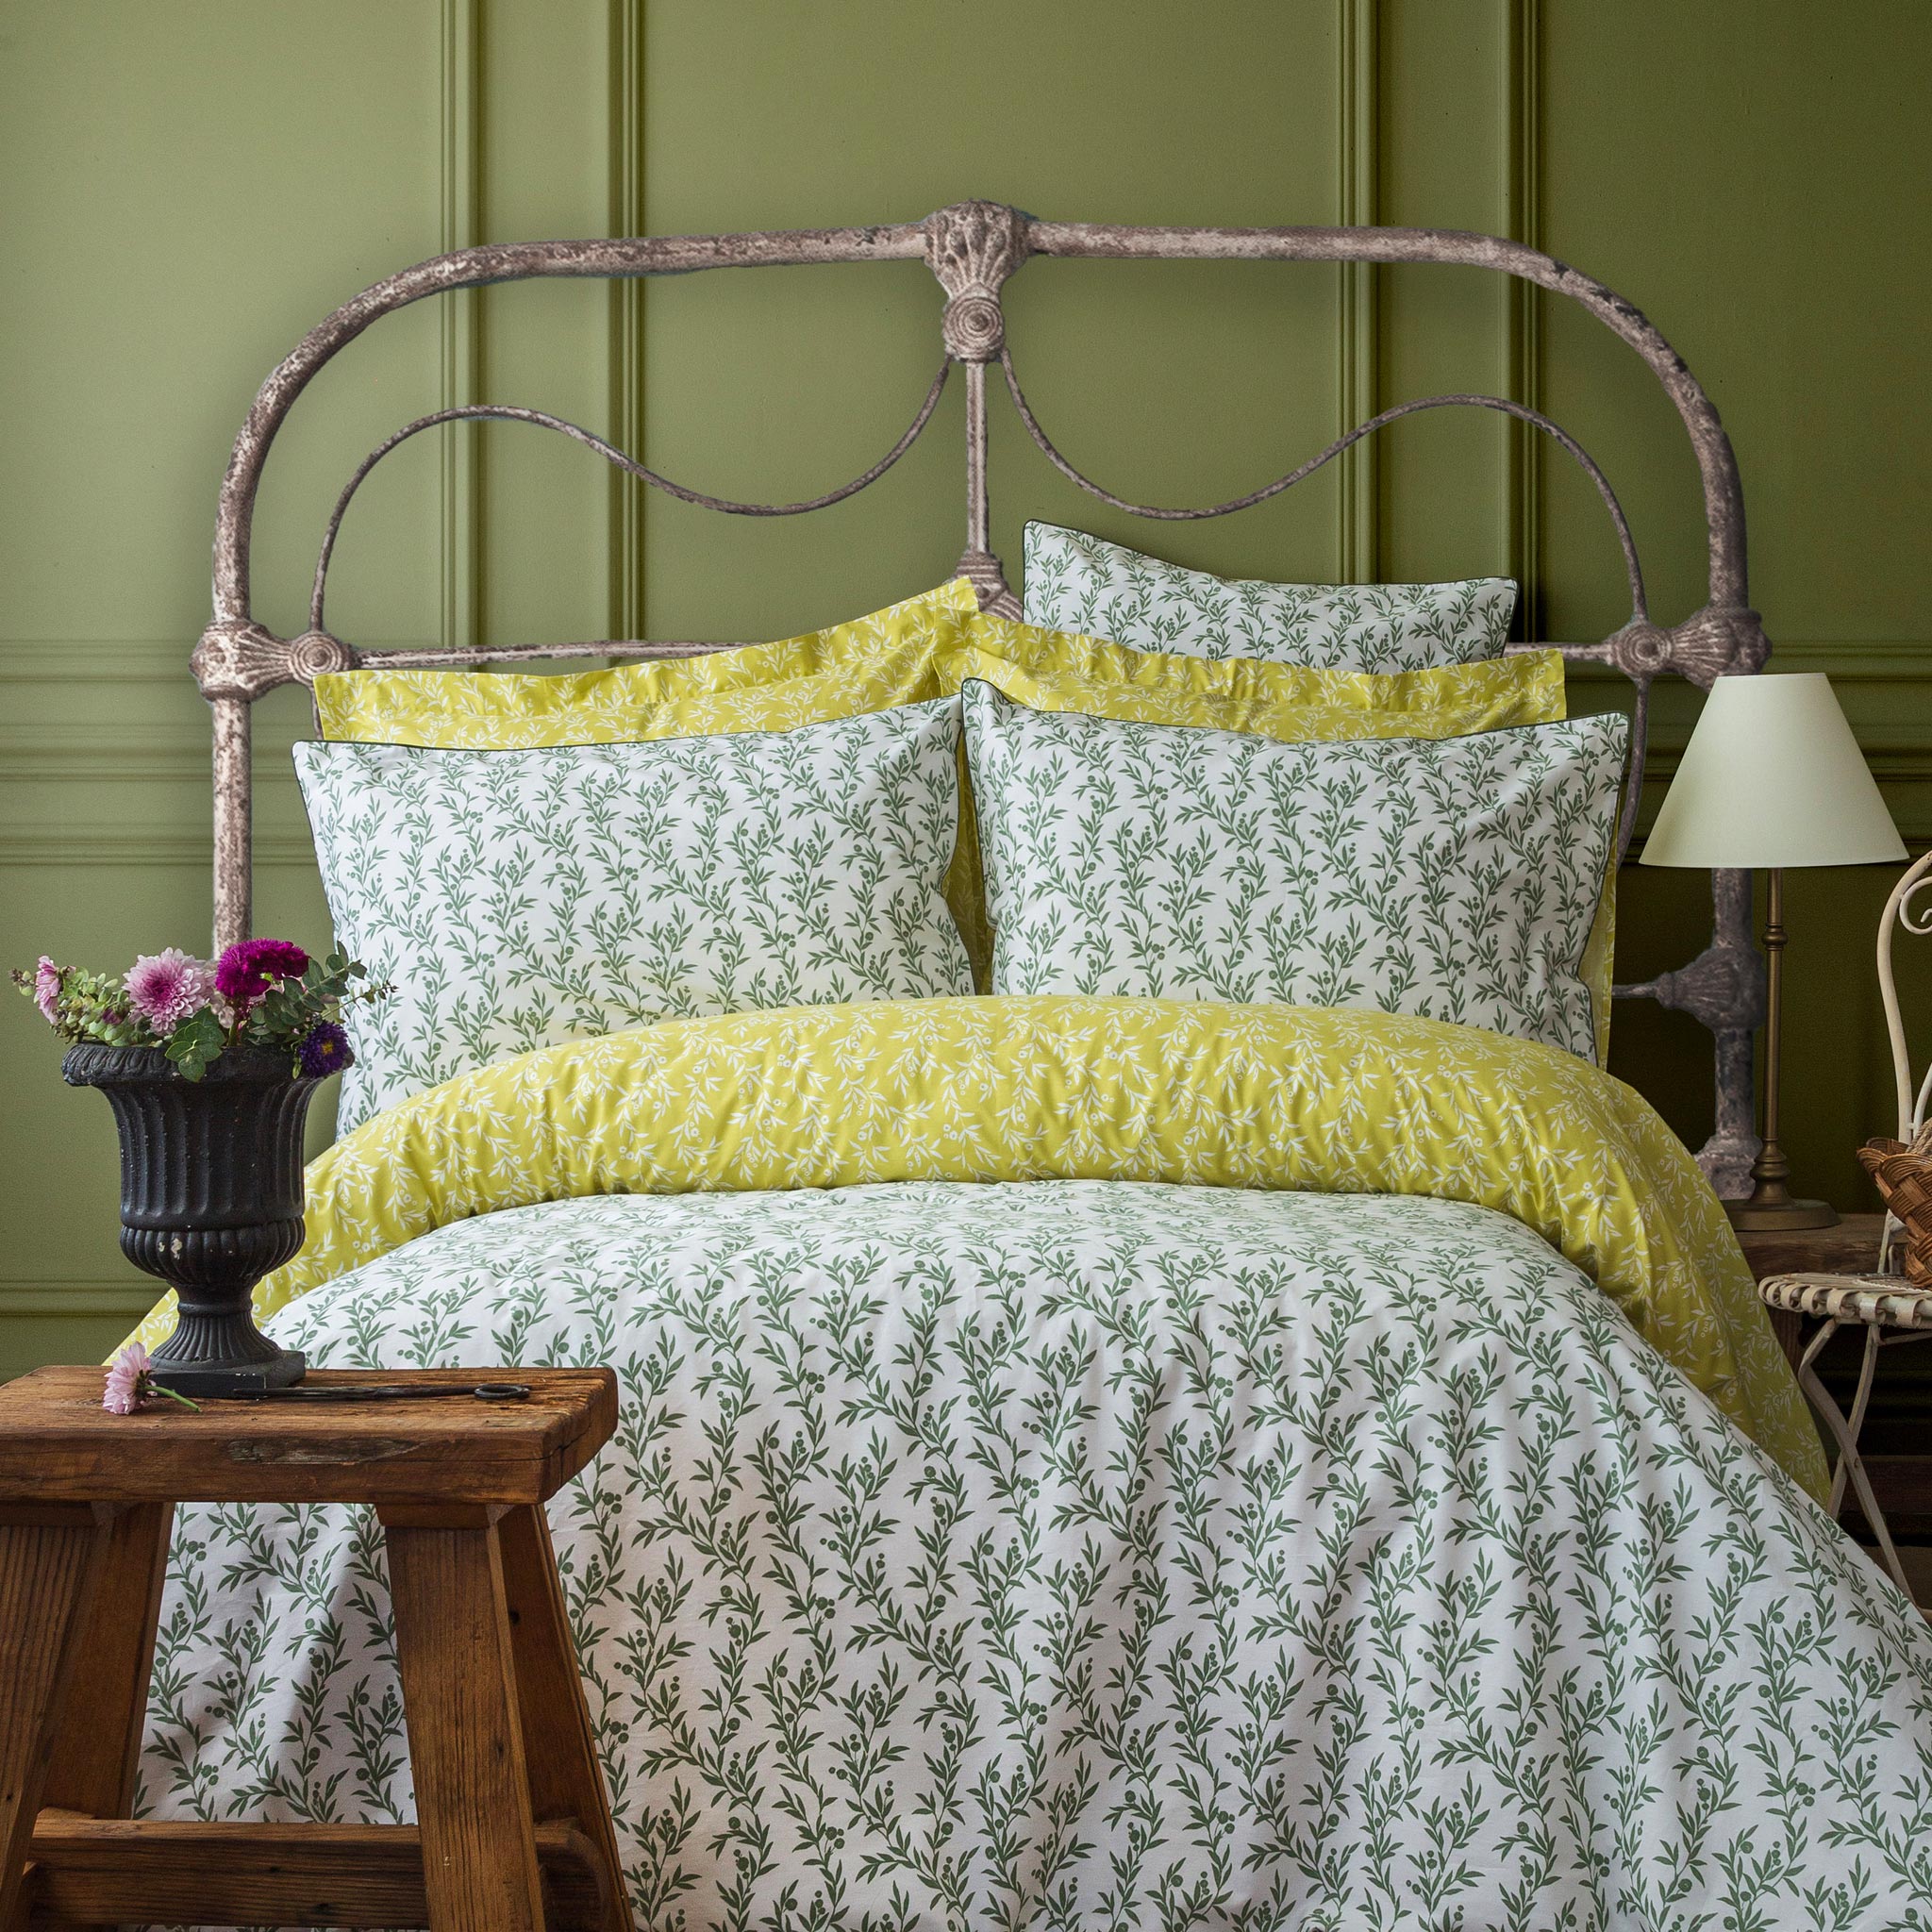 Luxury Cotton Percale Bedding Green Yellow Floral Duvet Cover Set